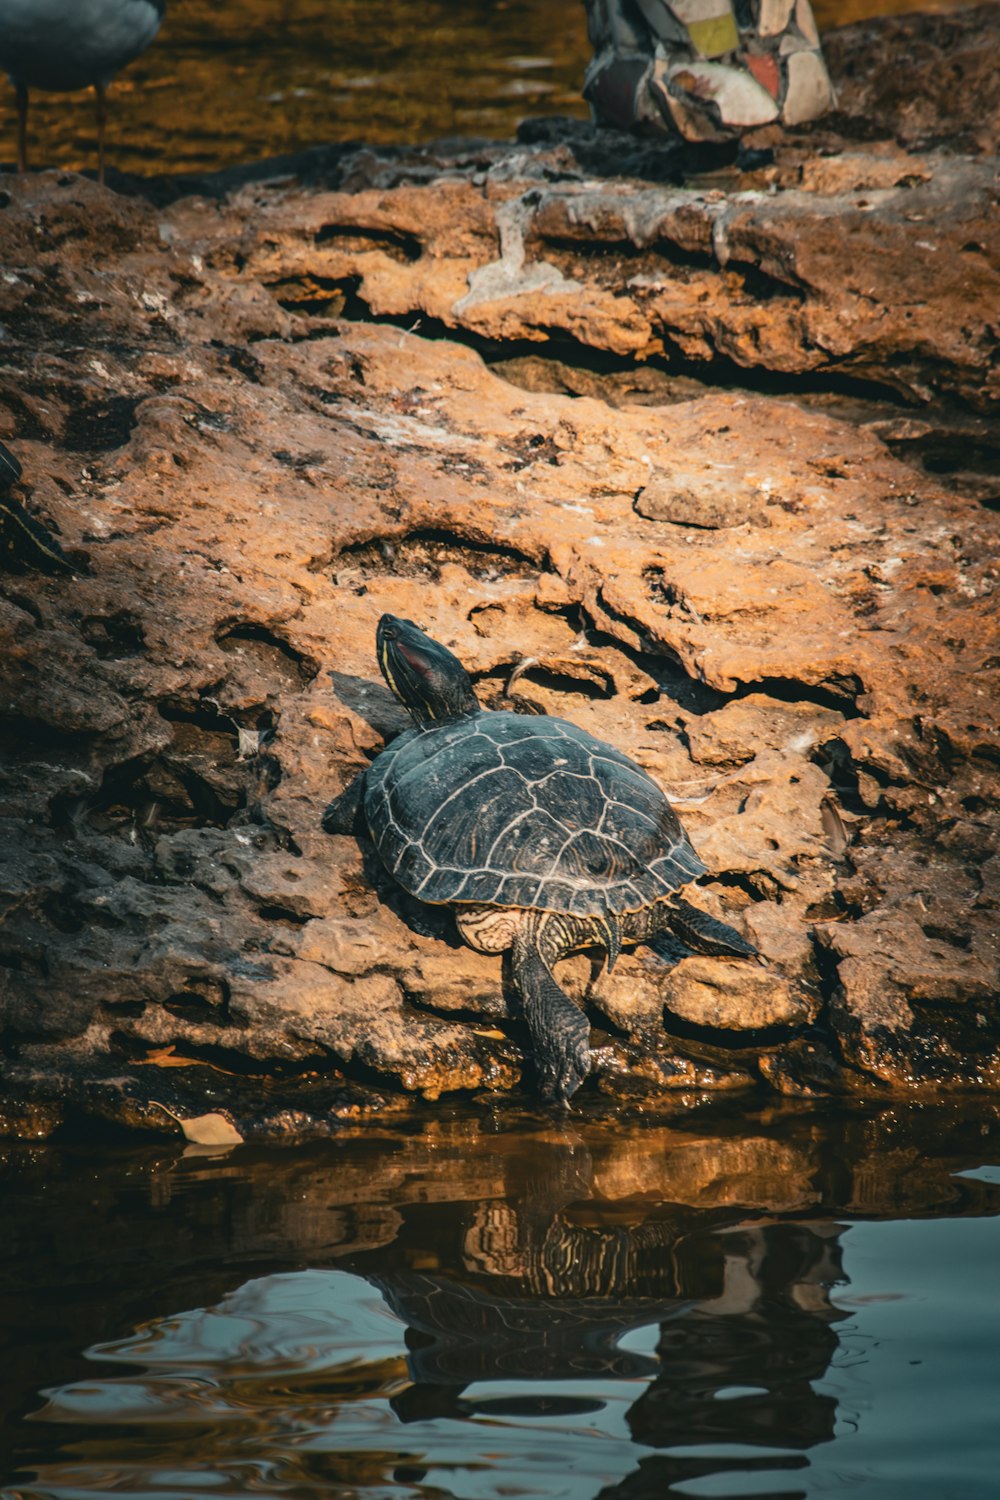 a turtle is sitting on the rocks by the water